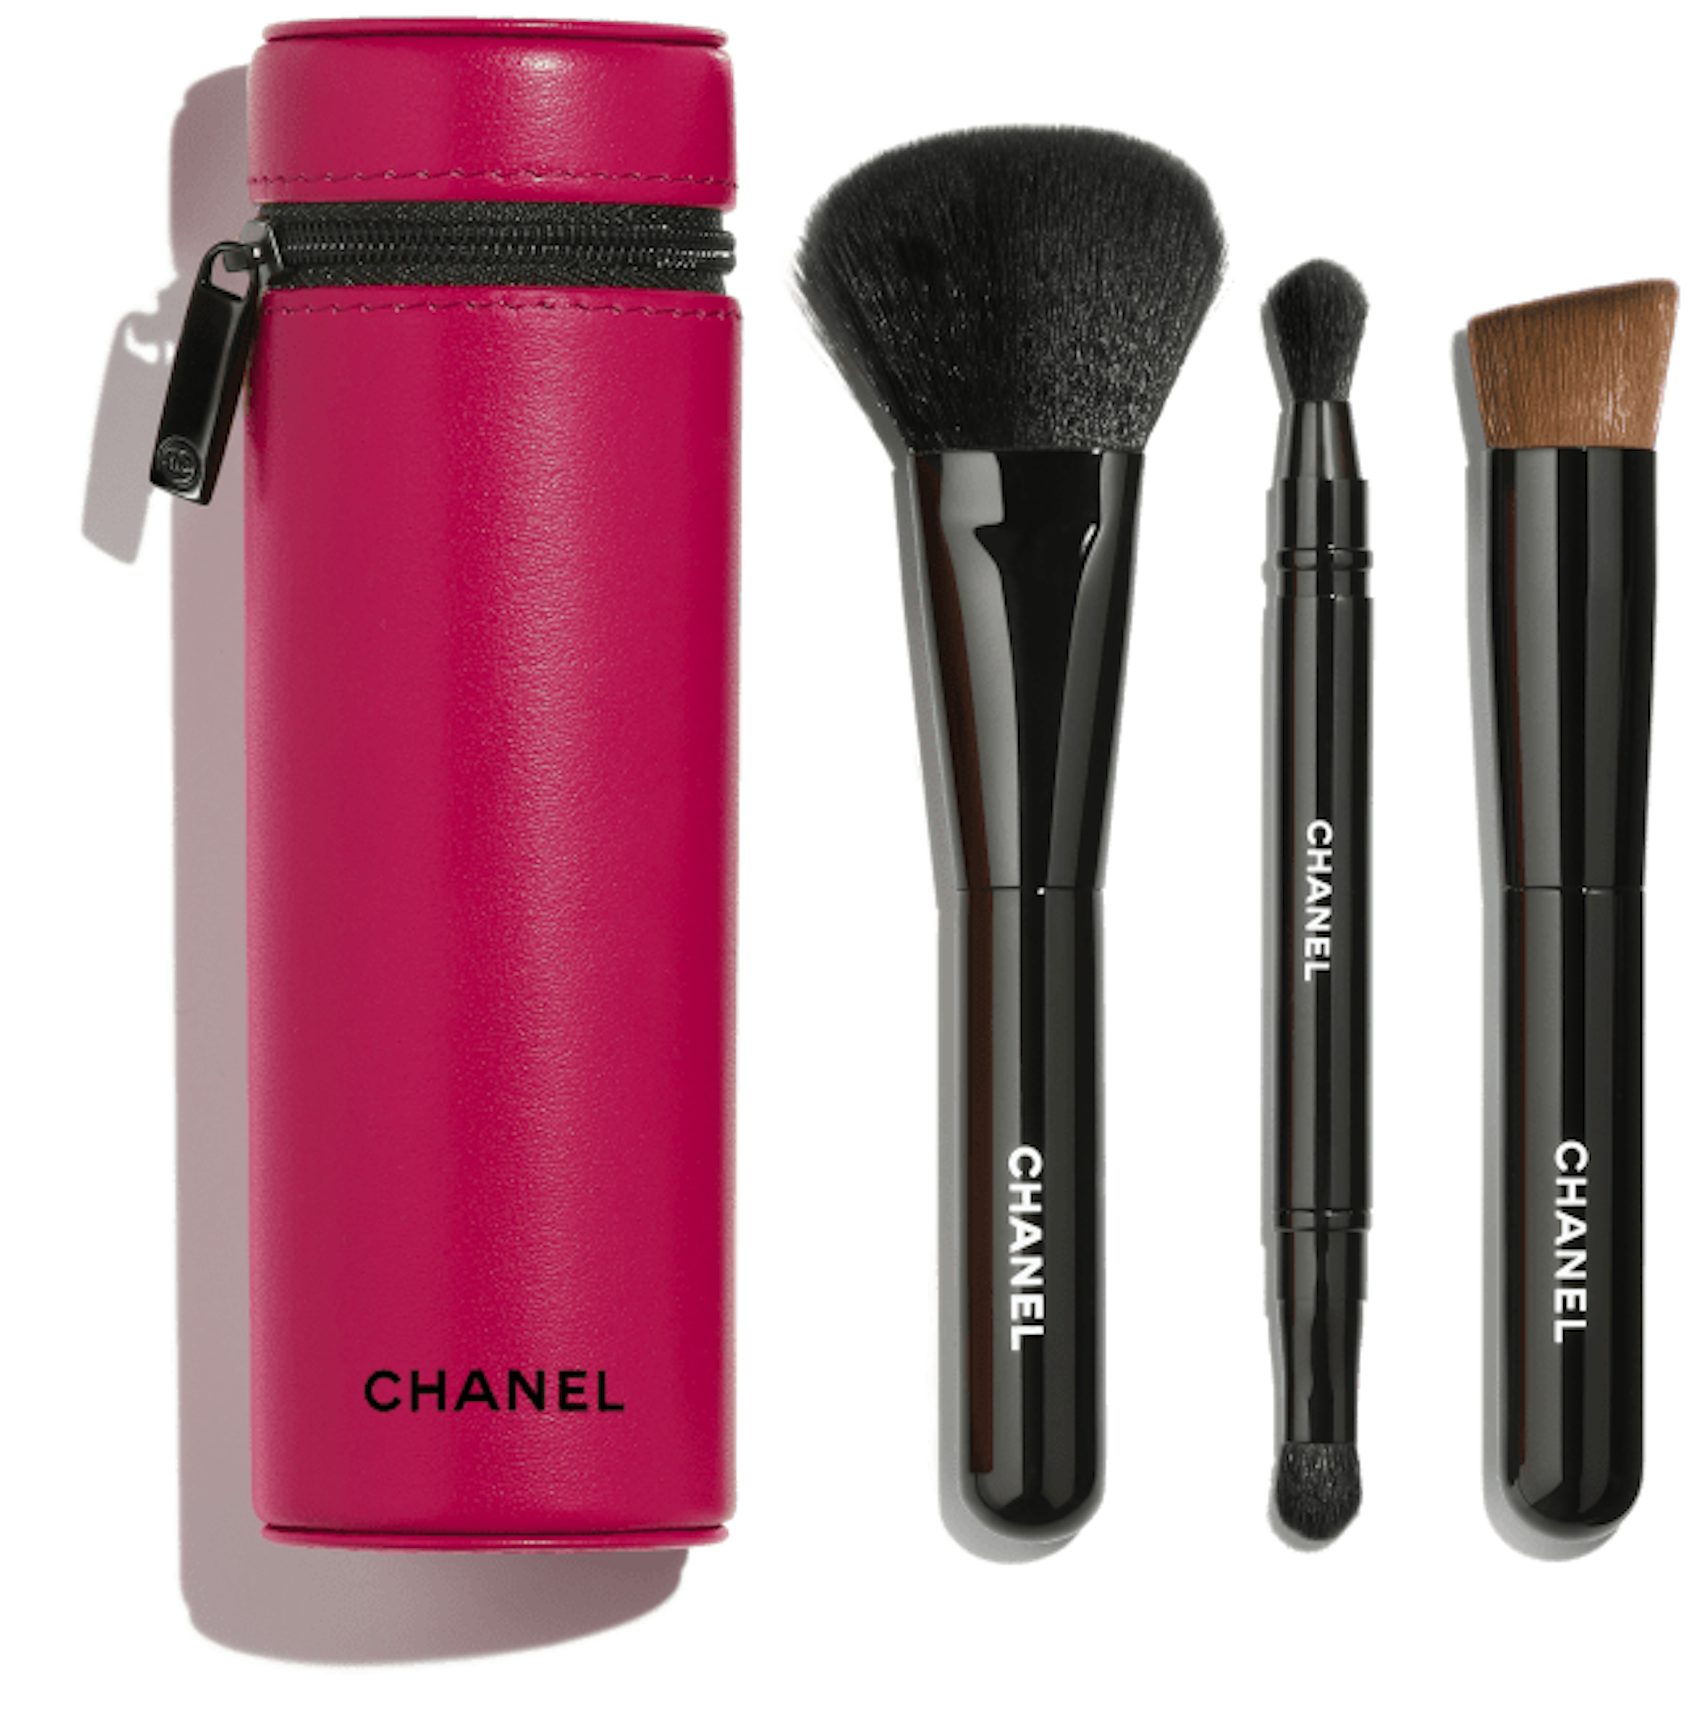 Chanel Codes Couleur Limited-Edition Collection of 3 Essential Brushes 143  - DIVA